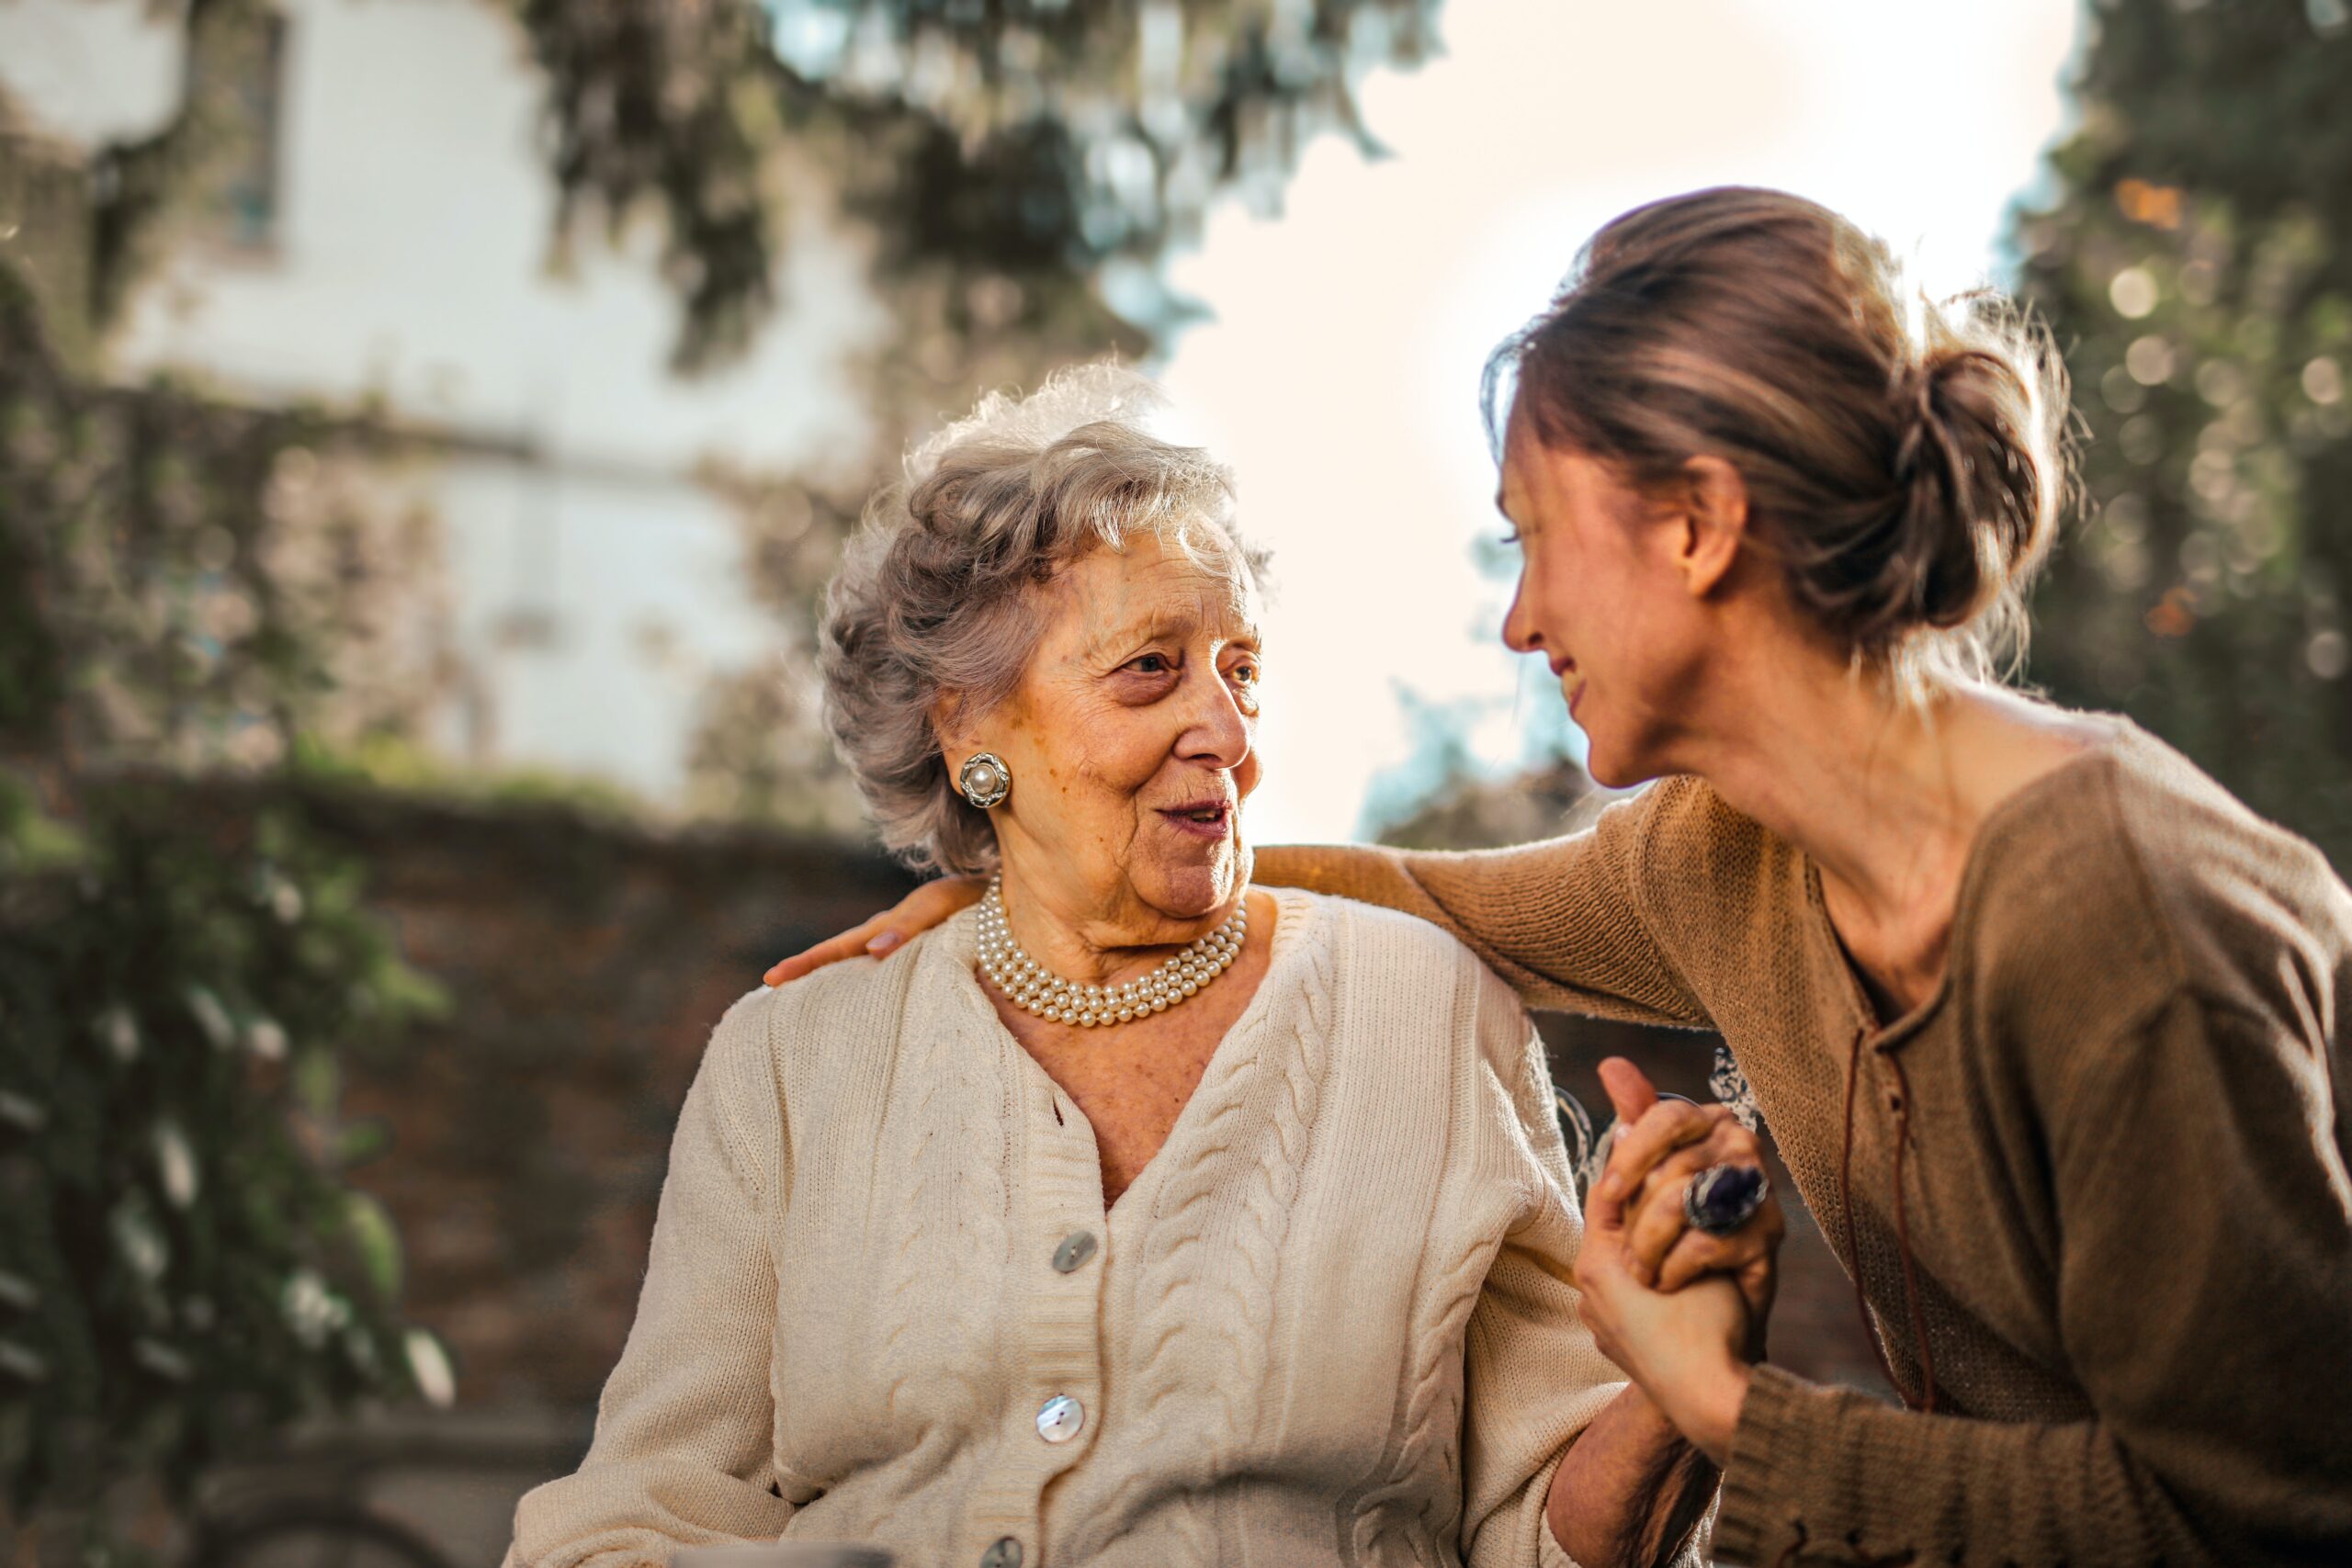 THE RISING POPULARITY AND SUCCESS OF IN-HOME SENIOR CARE FRANCHISES